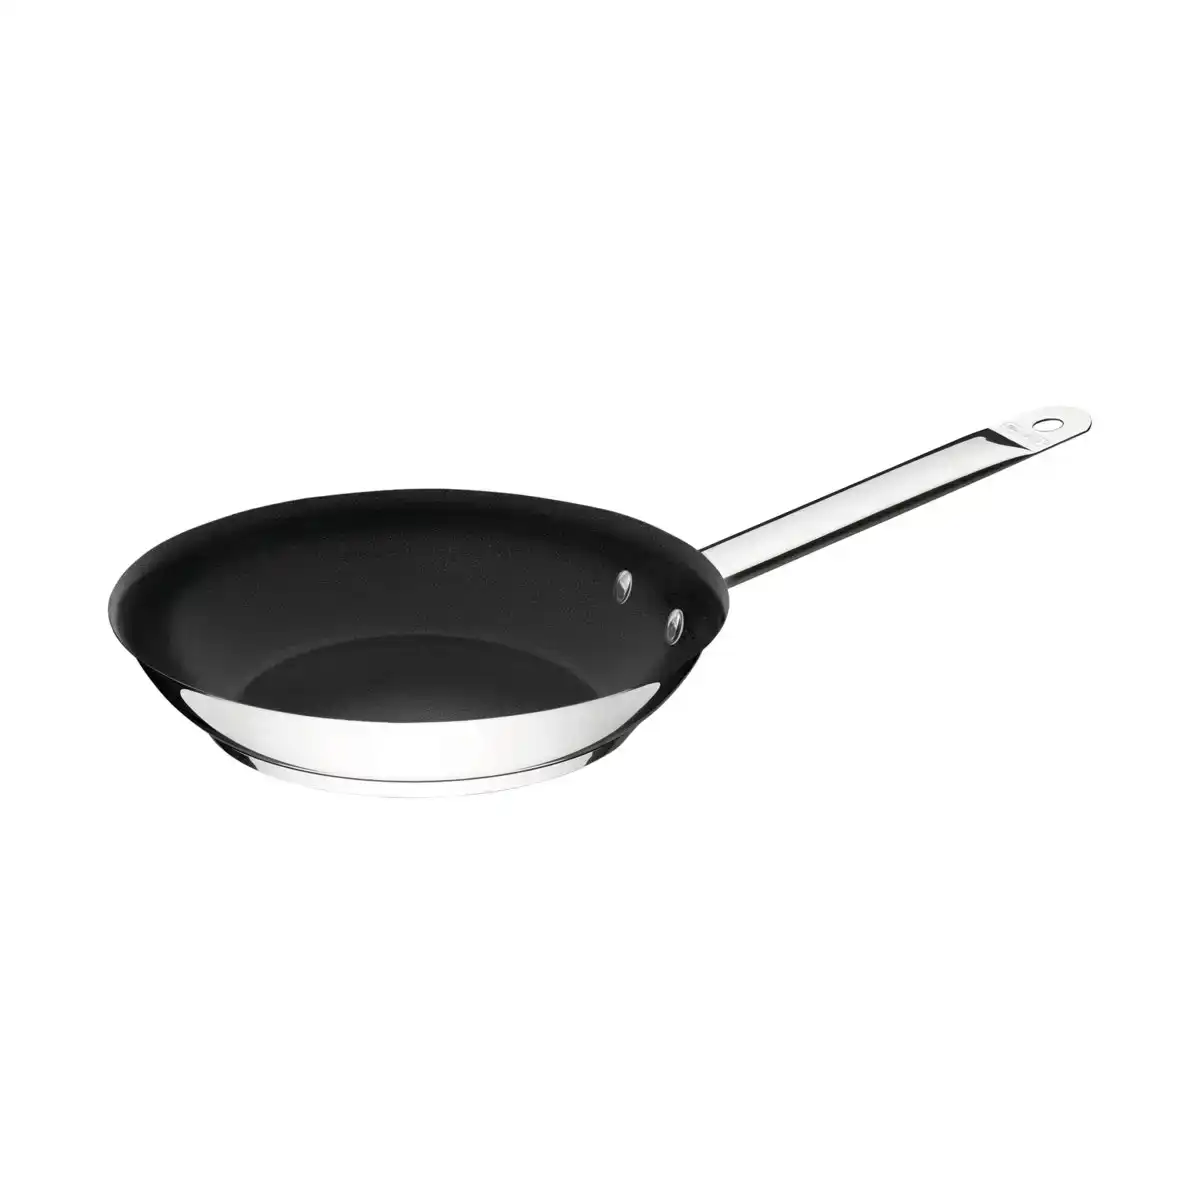 Tramontina Professional Frying Pan tri-ply Base and Interior non-stick 20 cm, 1.1 L